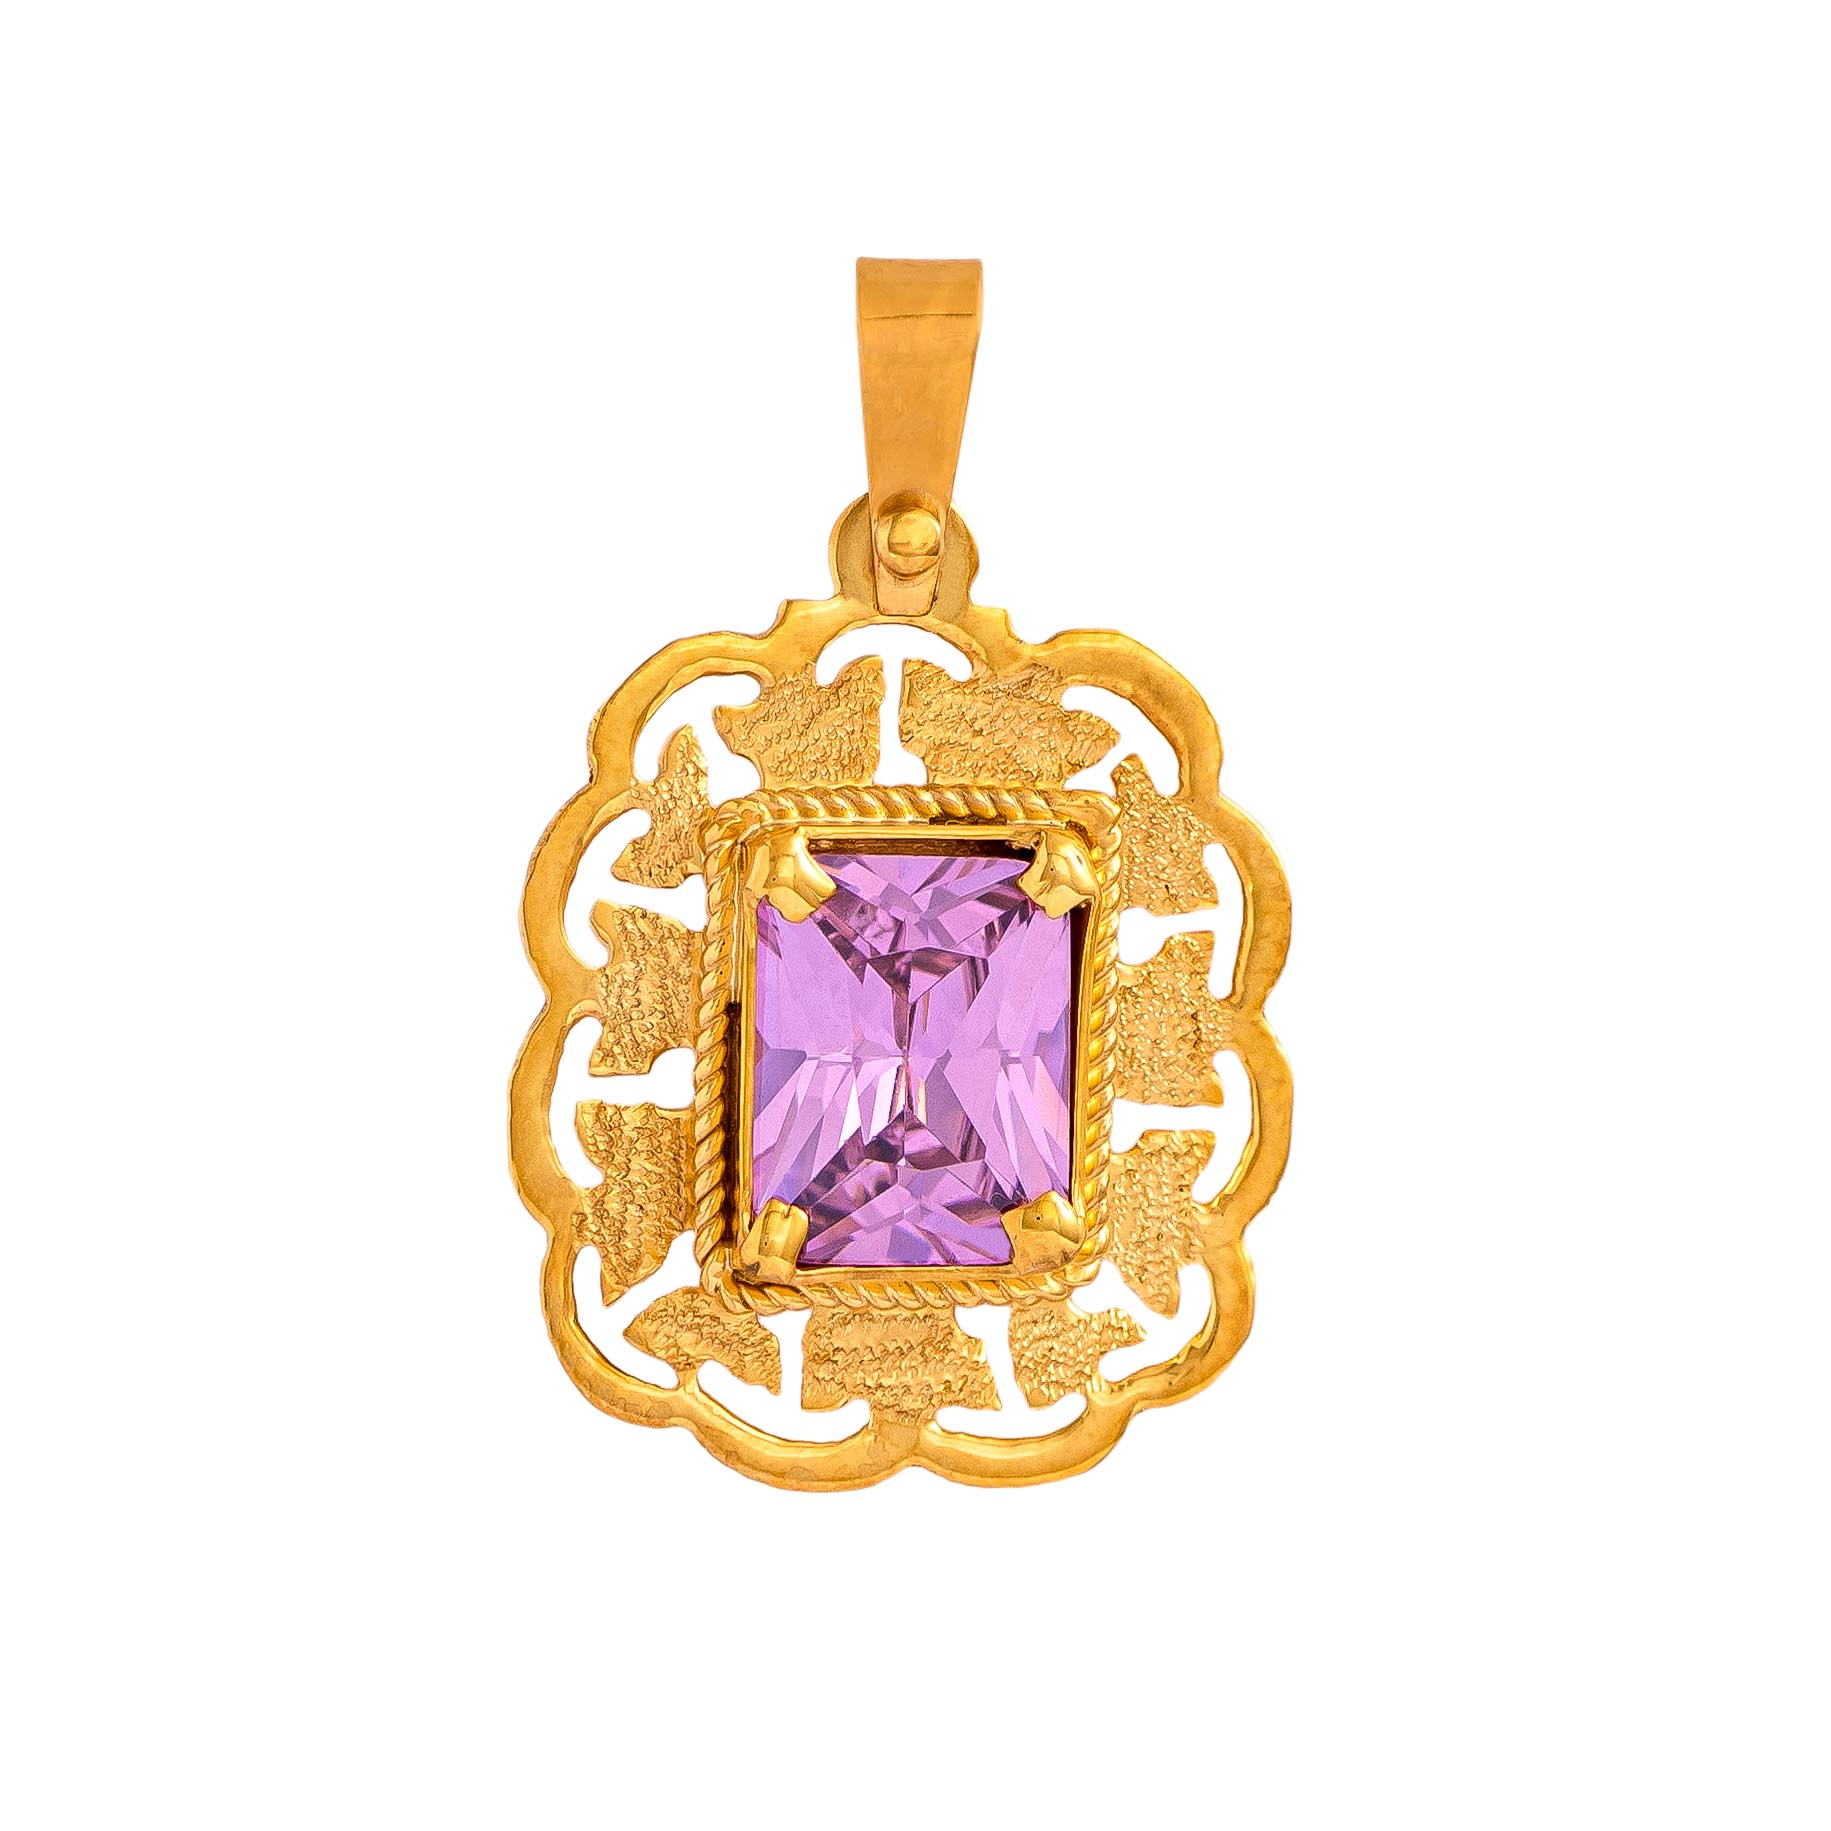 Handmade Pendant in Yellow Gold 9kt with Synthetic Pink Sapphire